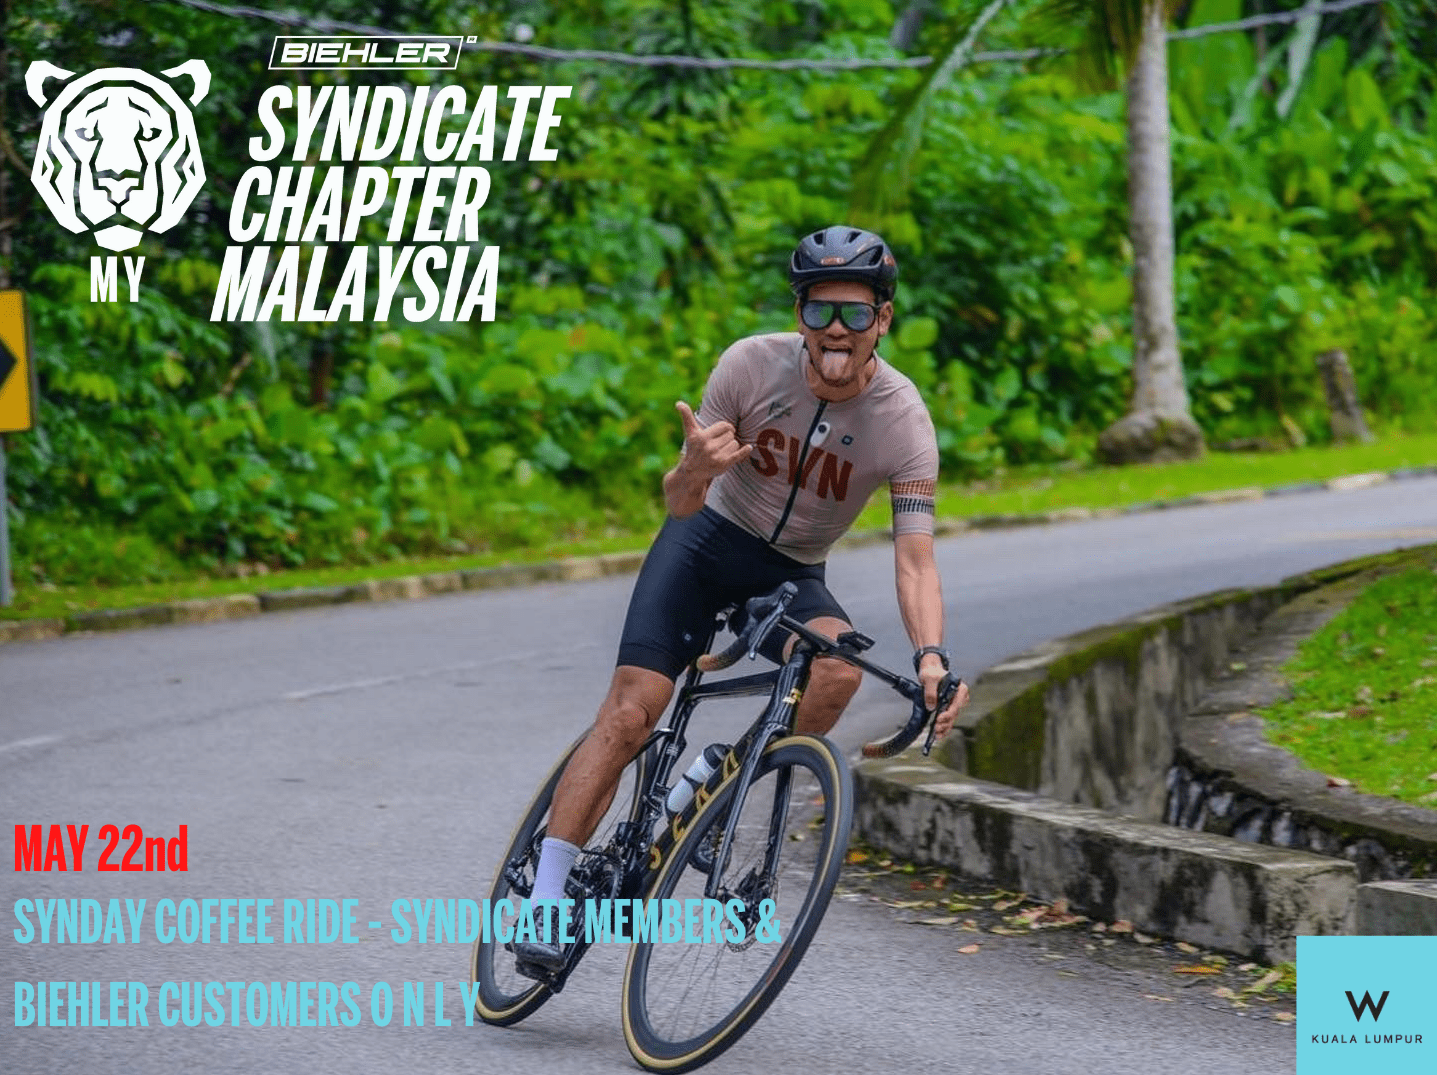 7TH SYNDICATE MALAYSIA CHAPTER cycling club